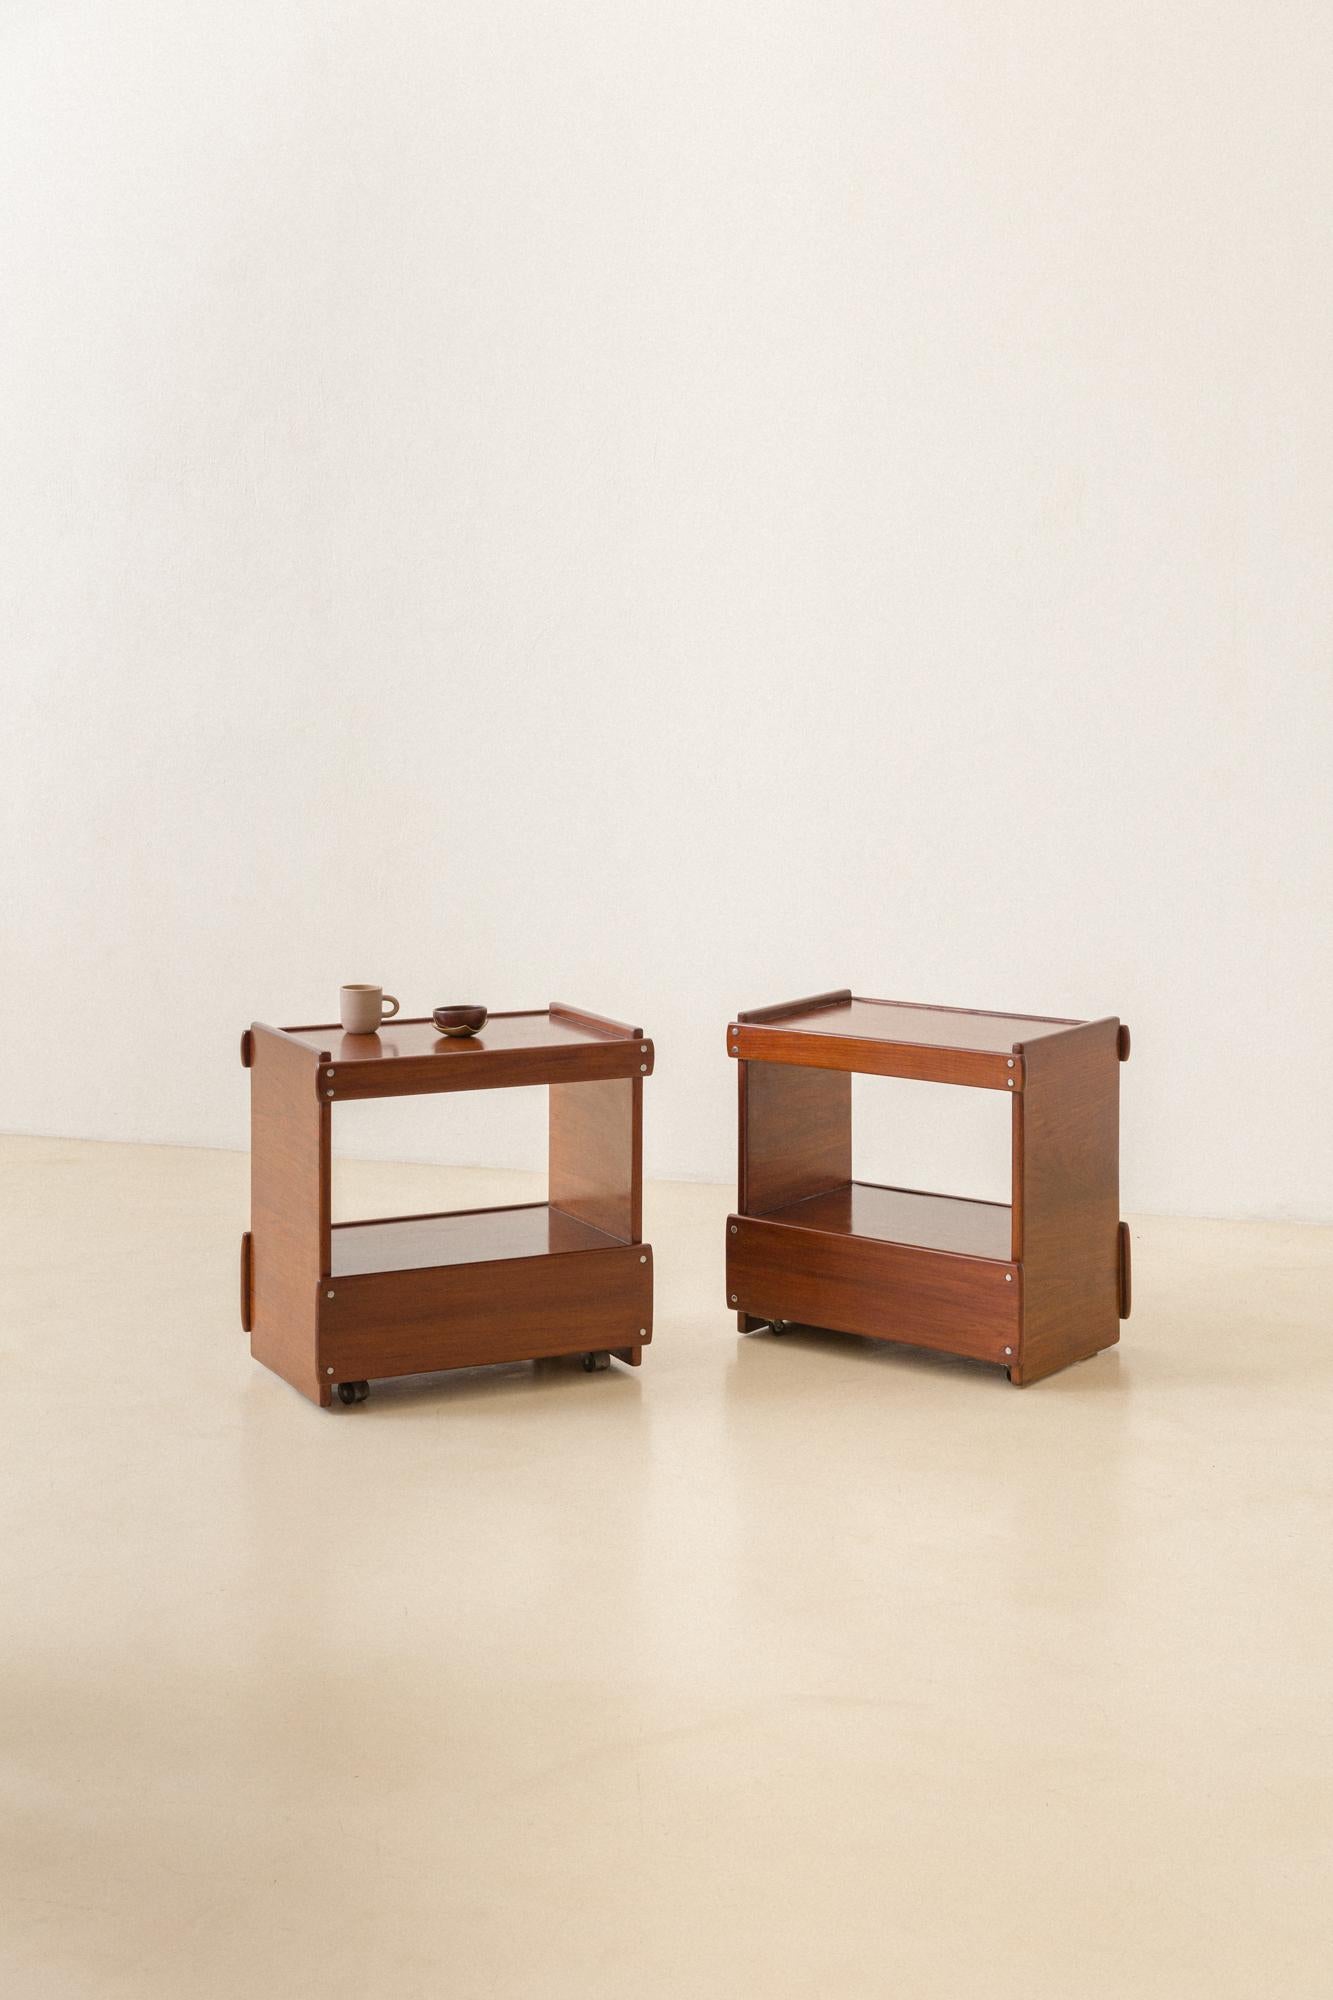 This nightstand was designed by Sergio Rodrigues (1914-2012) and produced in the 1960s. Following the same structural thought as other pieces by Rodrigues, like the 